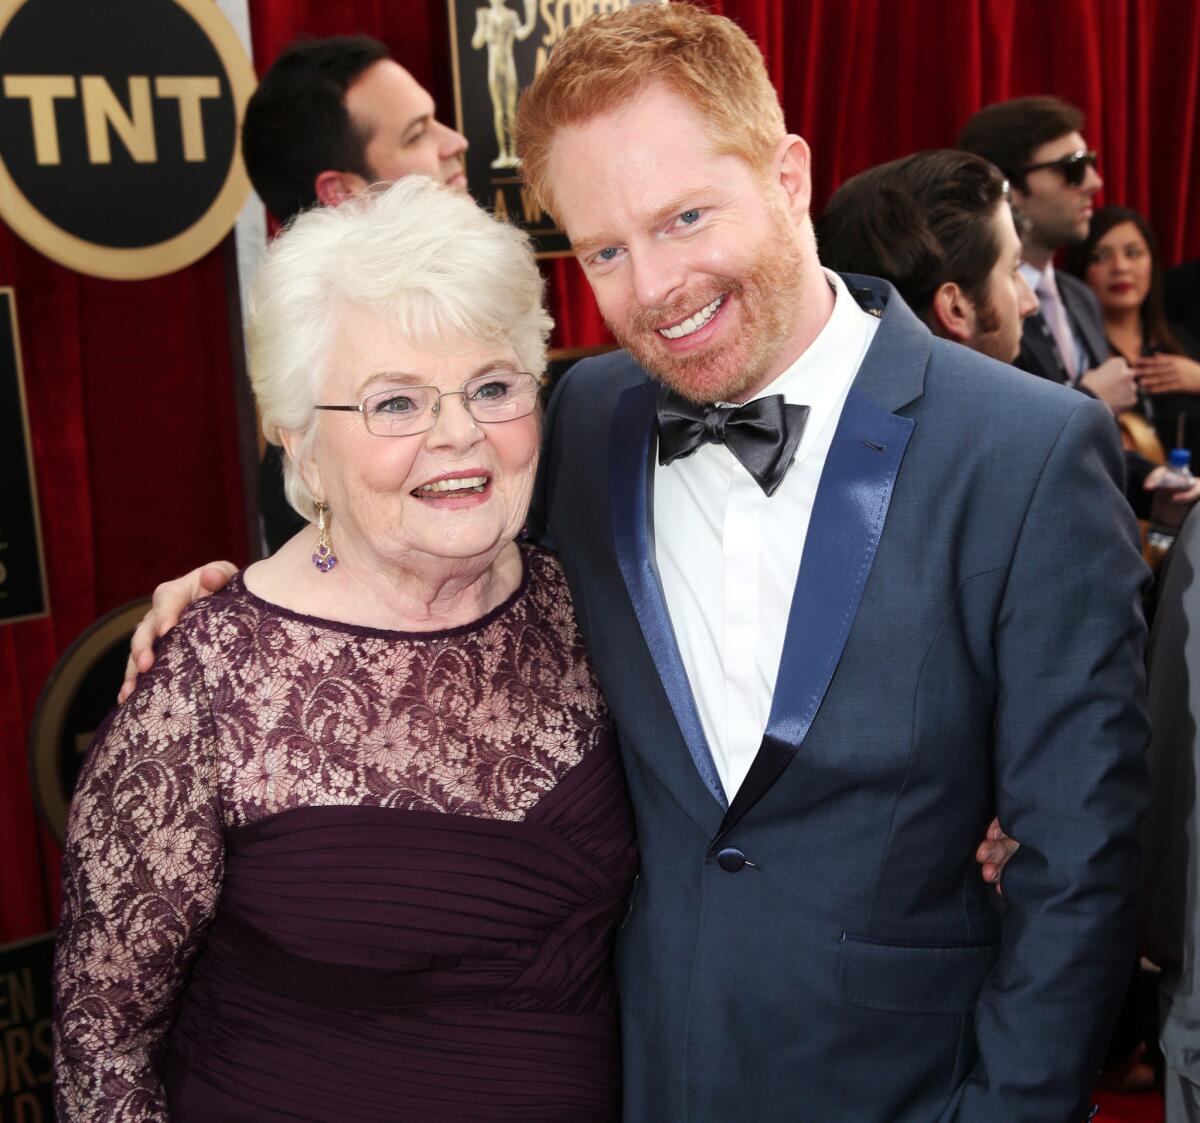 "Nebraska" actress June Squibb, left, poses with Jesse Tyler Ferguson of "Modern Family" at the 20th Screen Actors Guild Awards.